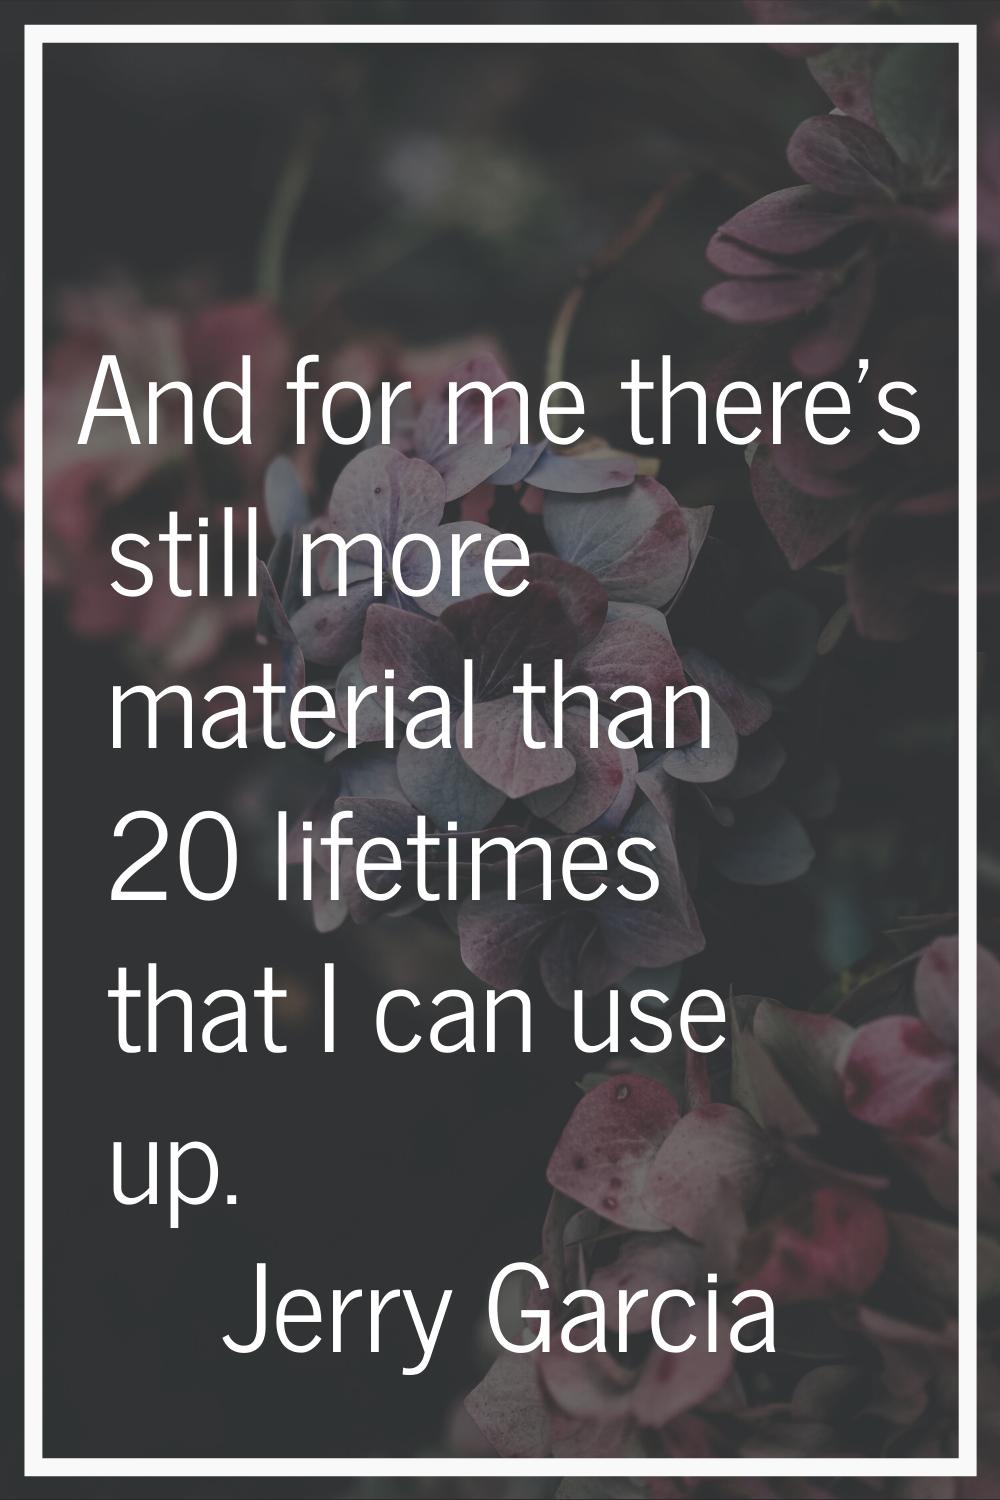 And for me there's still more material than 20 lifetimes that I can use up.